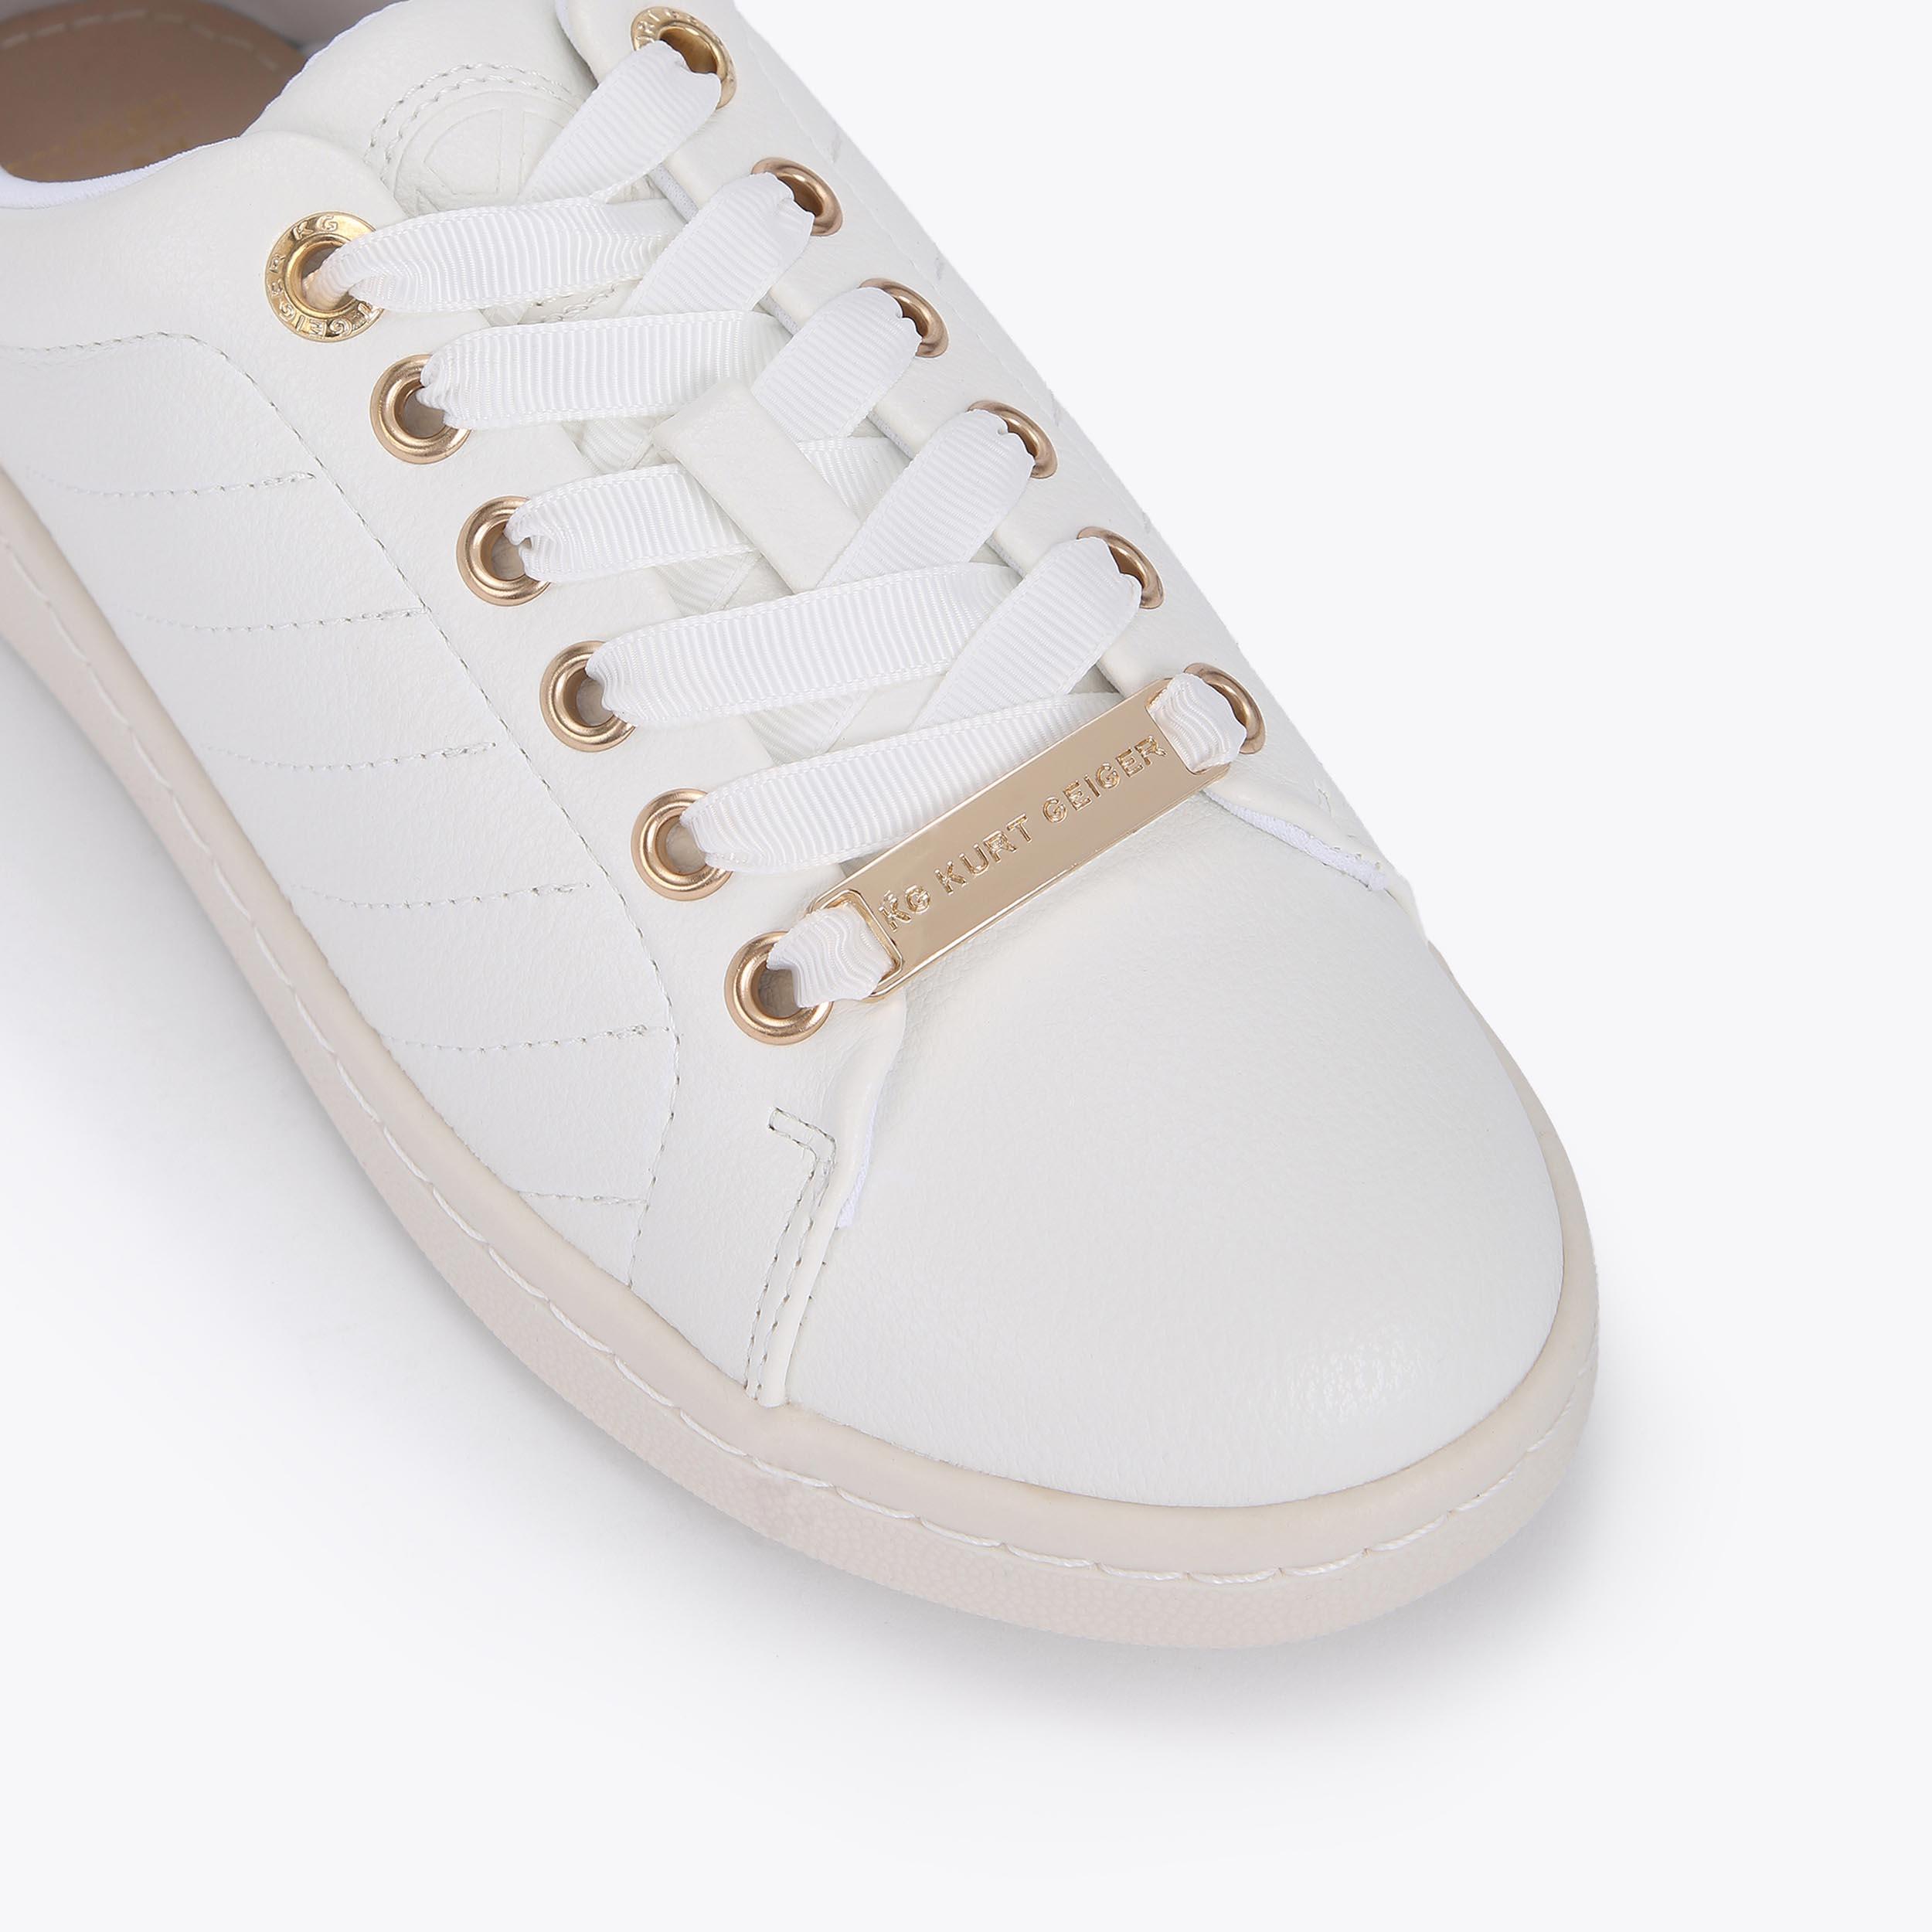 LIZA QUILT White Vegan Quilted Lace Up Sneakers by KG KURT GEIGER